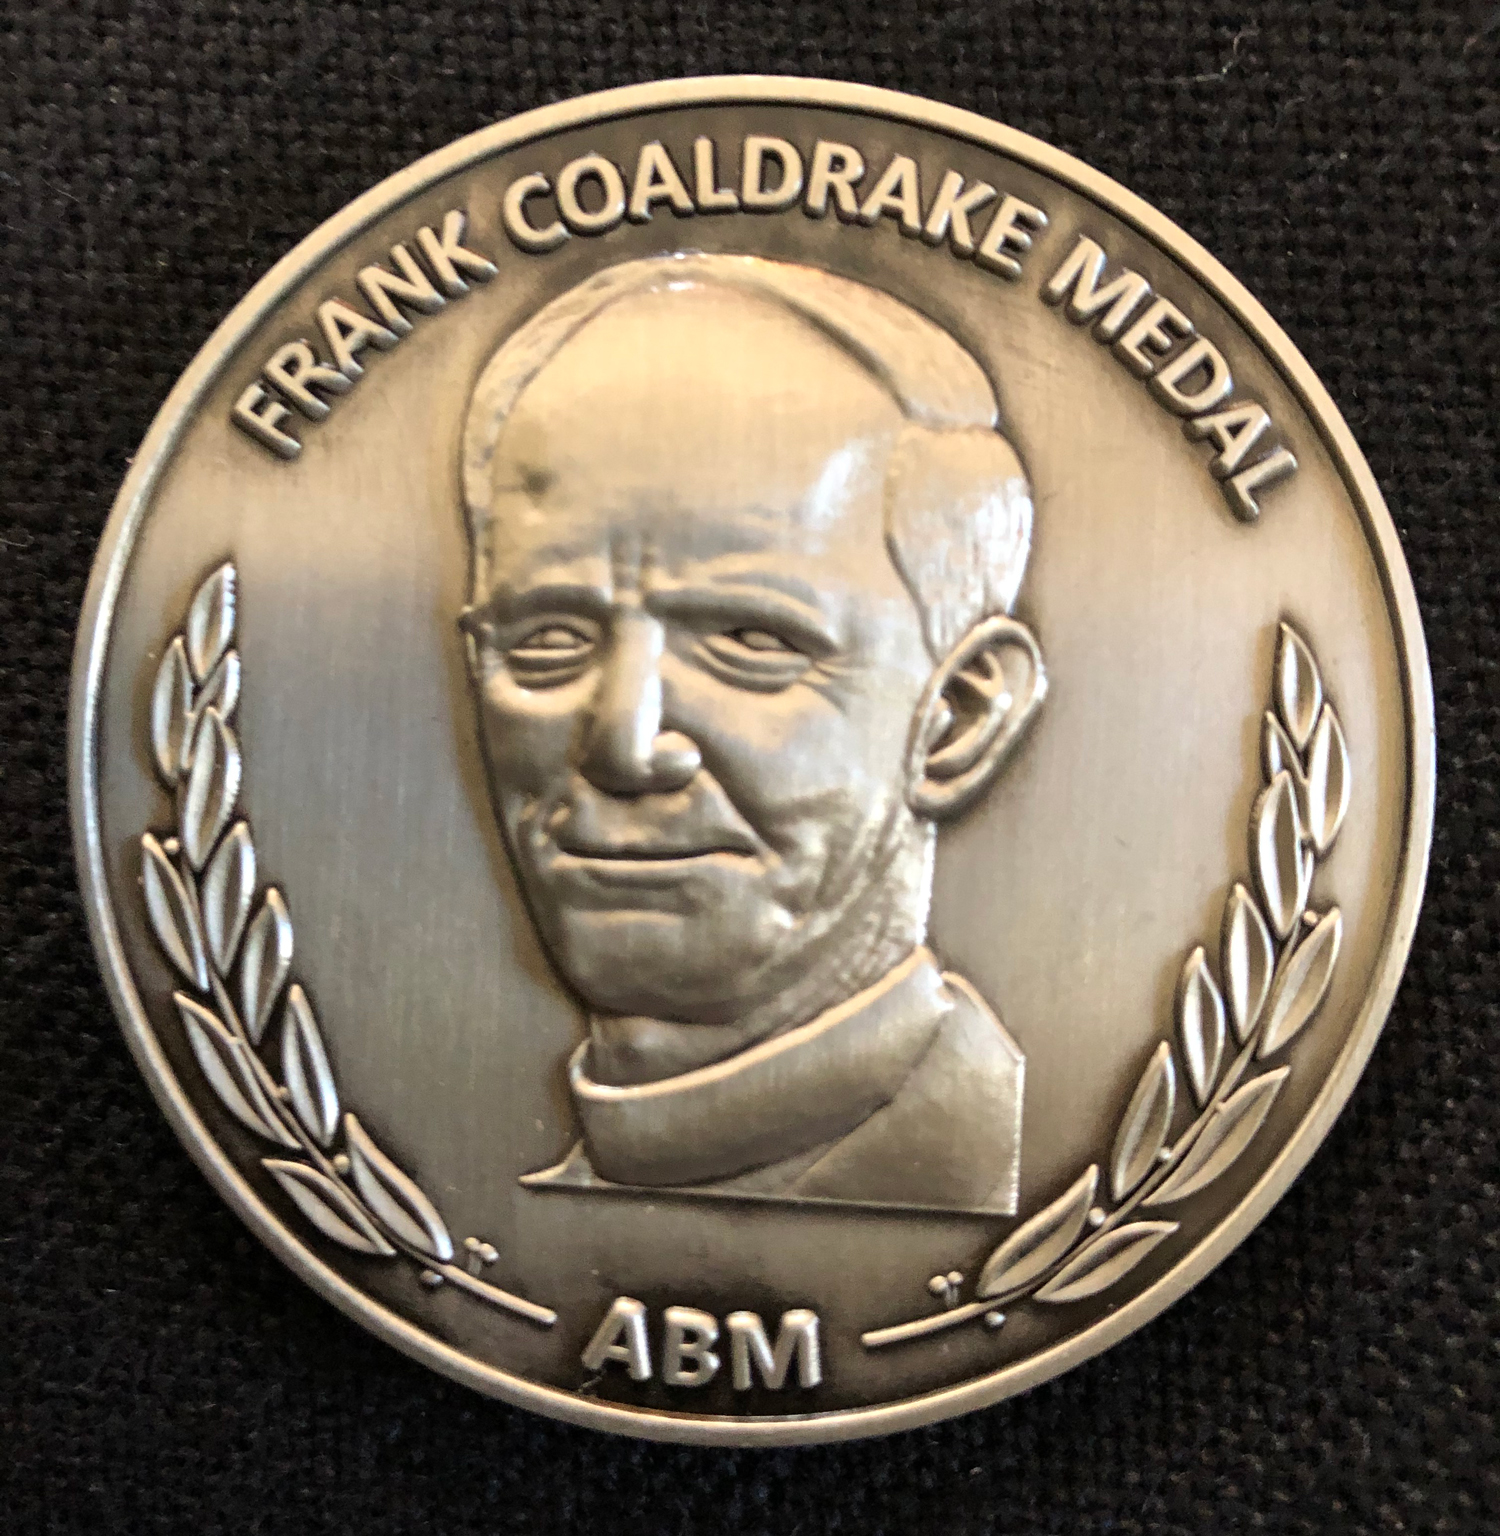 John received a Coaldrake medal for his exceptional service to God's mission